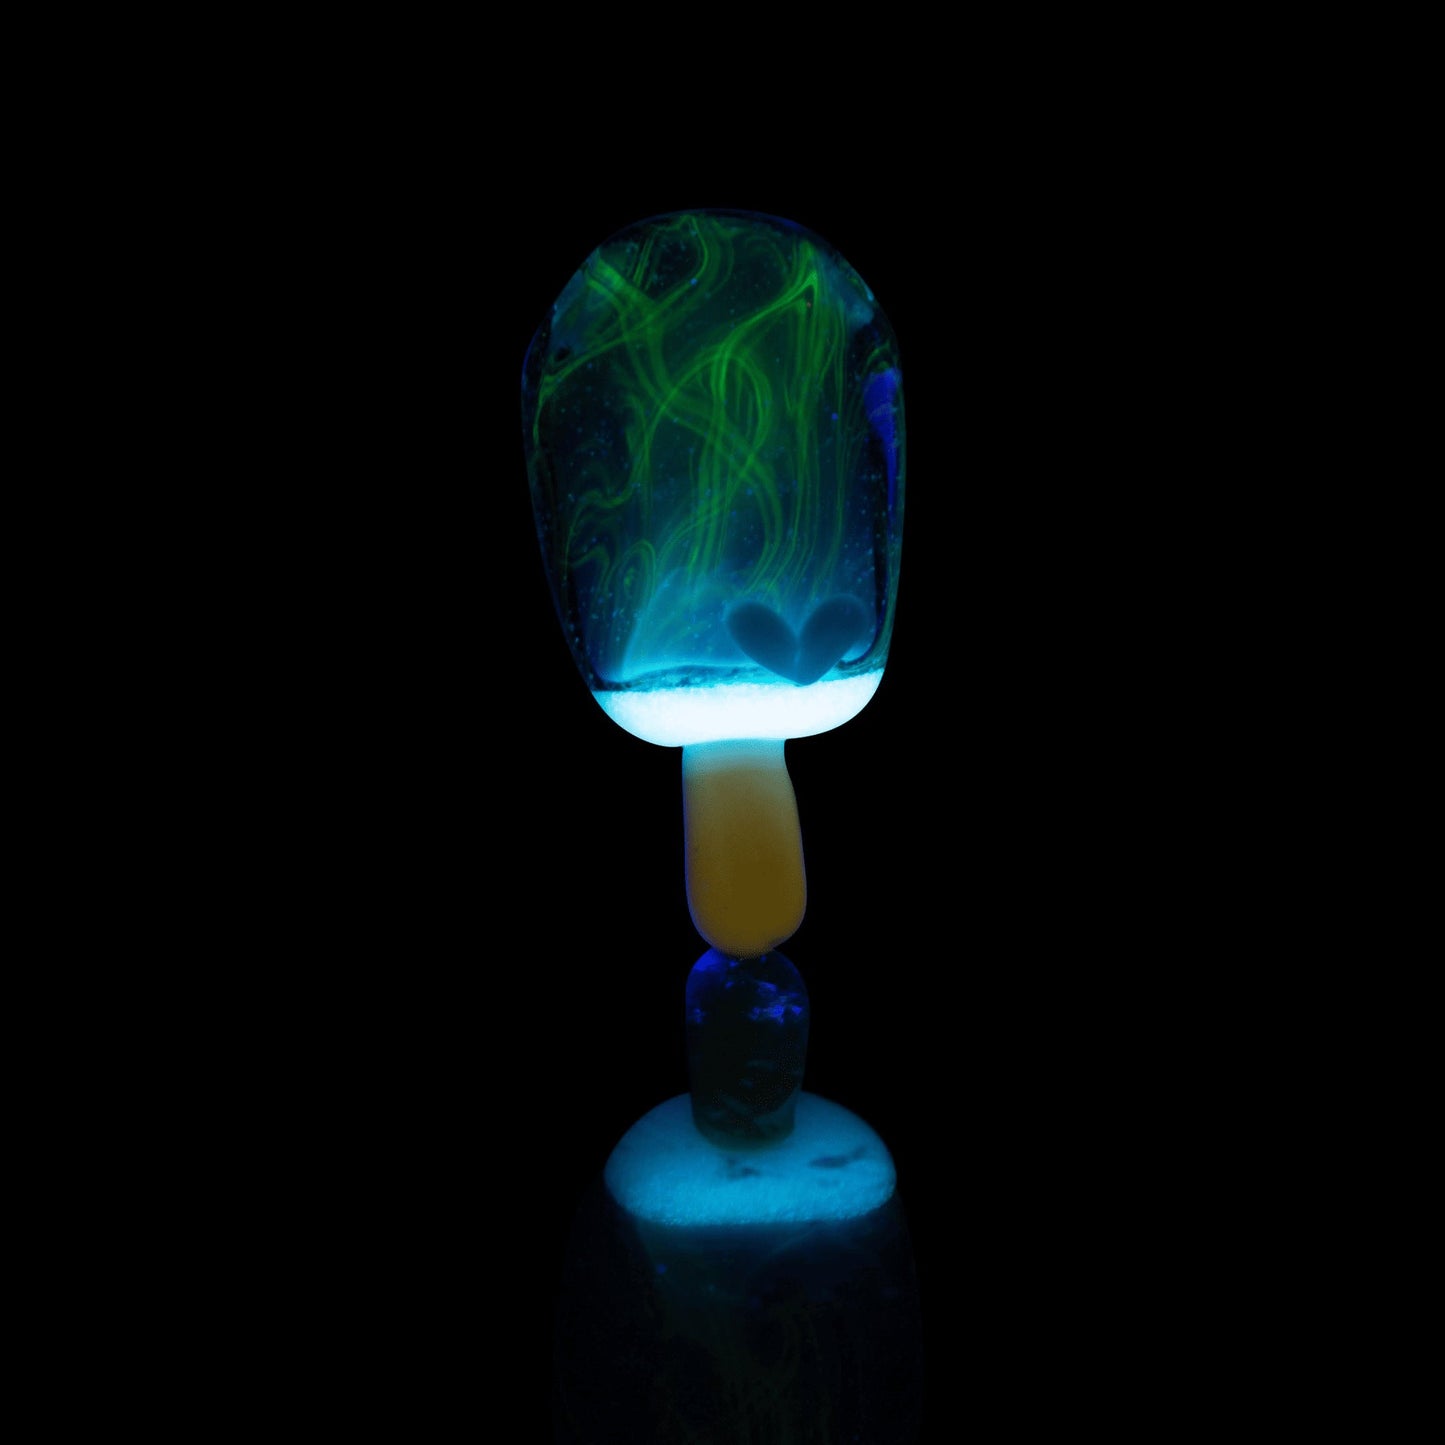 artisan-crafted glass pendant - Collab Scribbly Popsicle Pendant (B) by Sakibomb Hackysacky x Scomo Moanet (Scribble Season 2022)